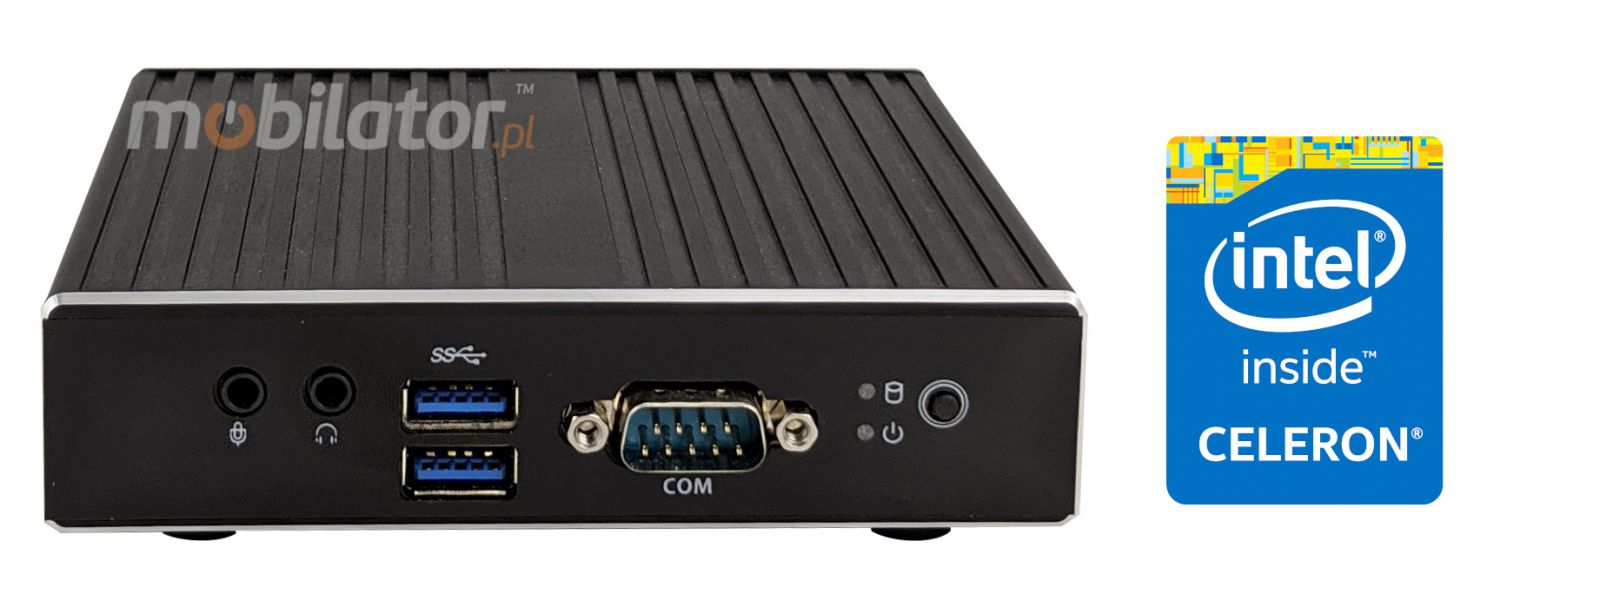 Polywell-Nano-N3350D a small reliable and fast mini pc with a powerful processor